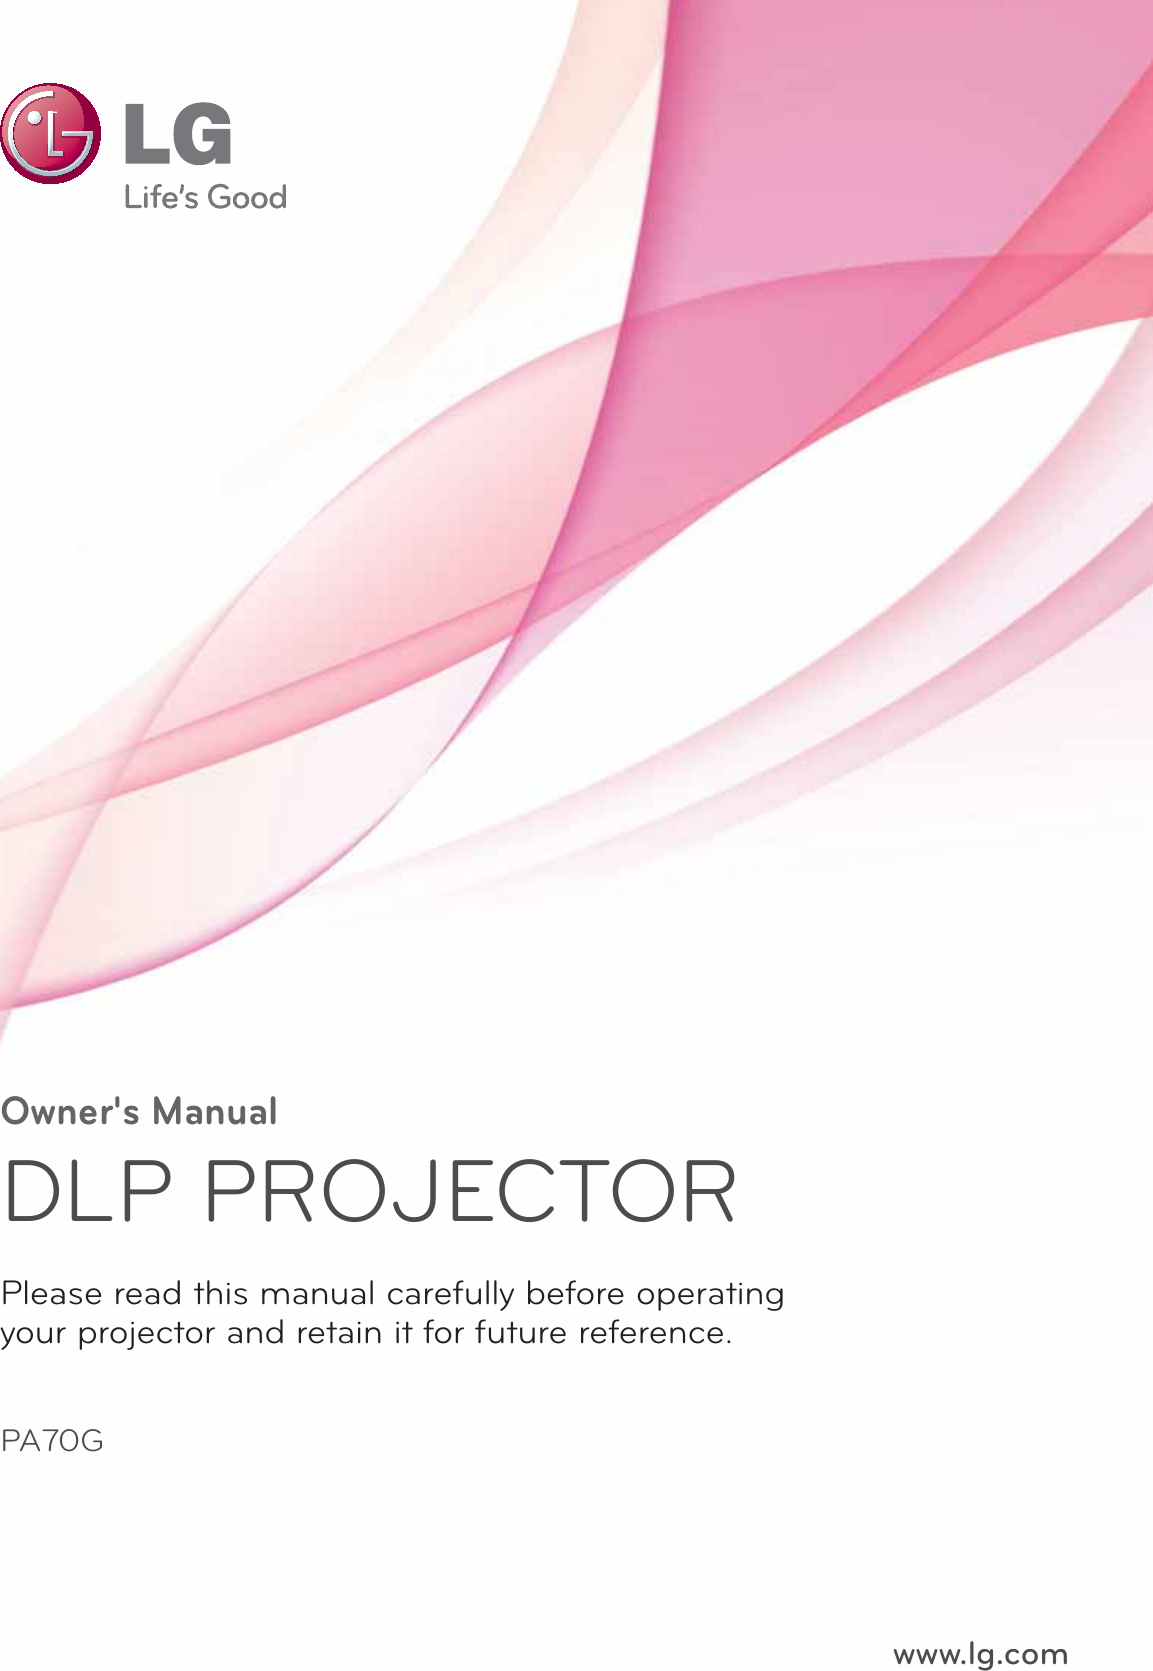 Owner&apos;s ManualDLP PROJECTORPA70GPlease read this manual carefully before operatingyour projector and retain it for future reference.www.lg.com